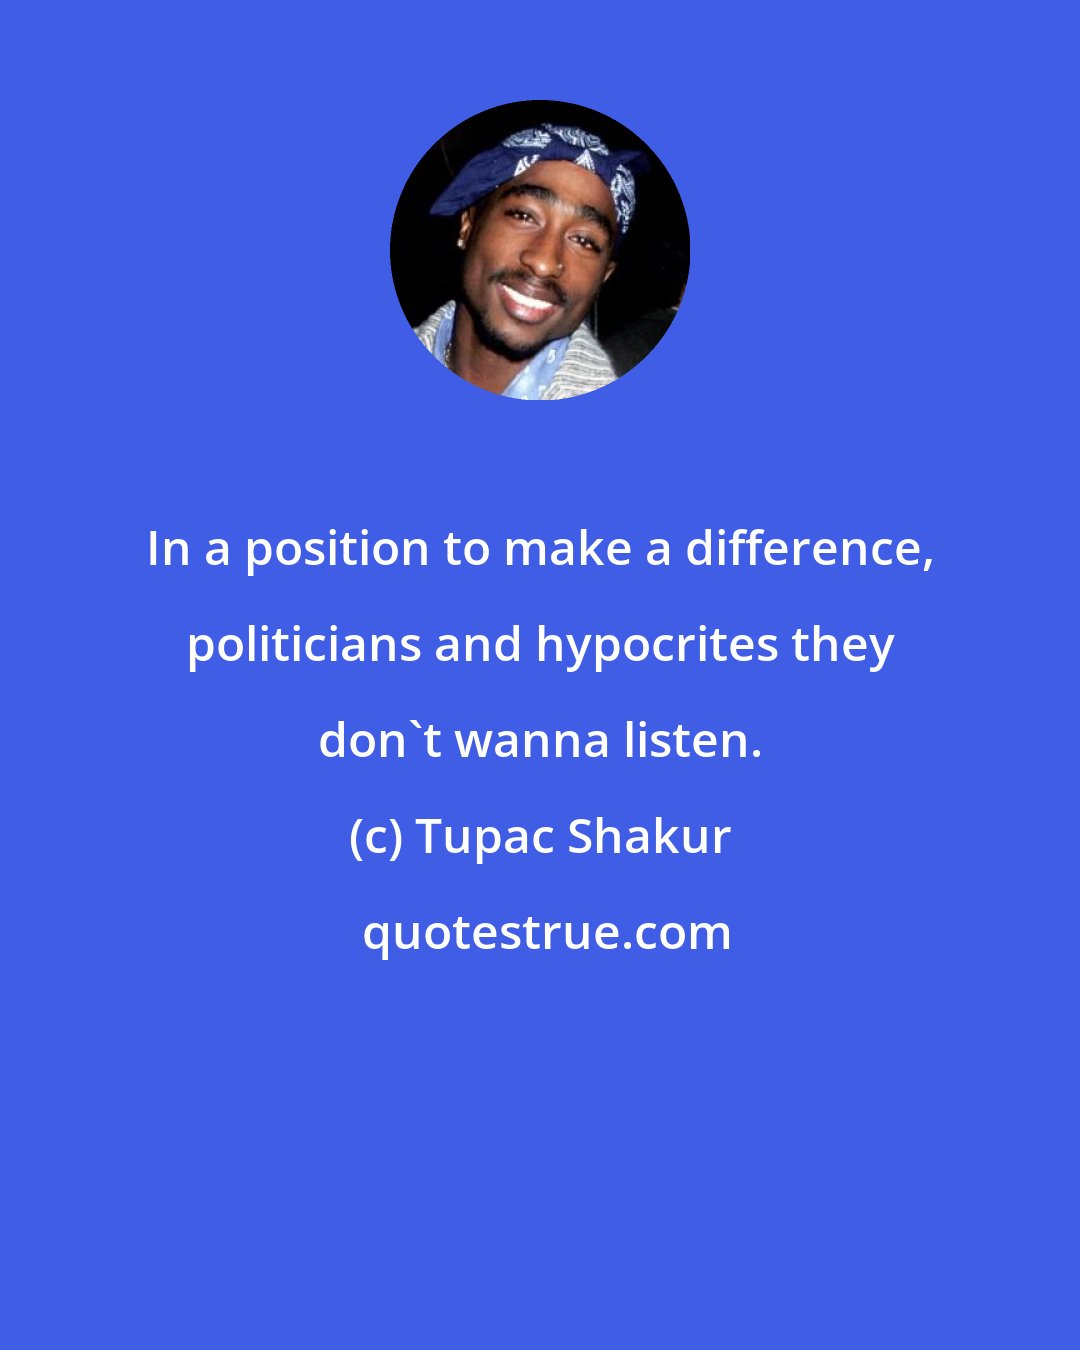 Tupac Shakur: In a position to make a difference, politicians and hypocrites they don't wanna listen.